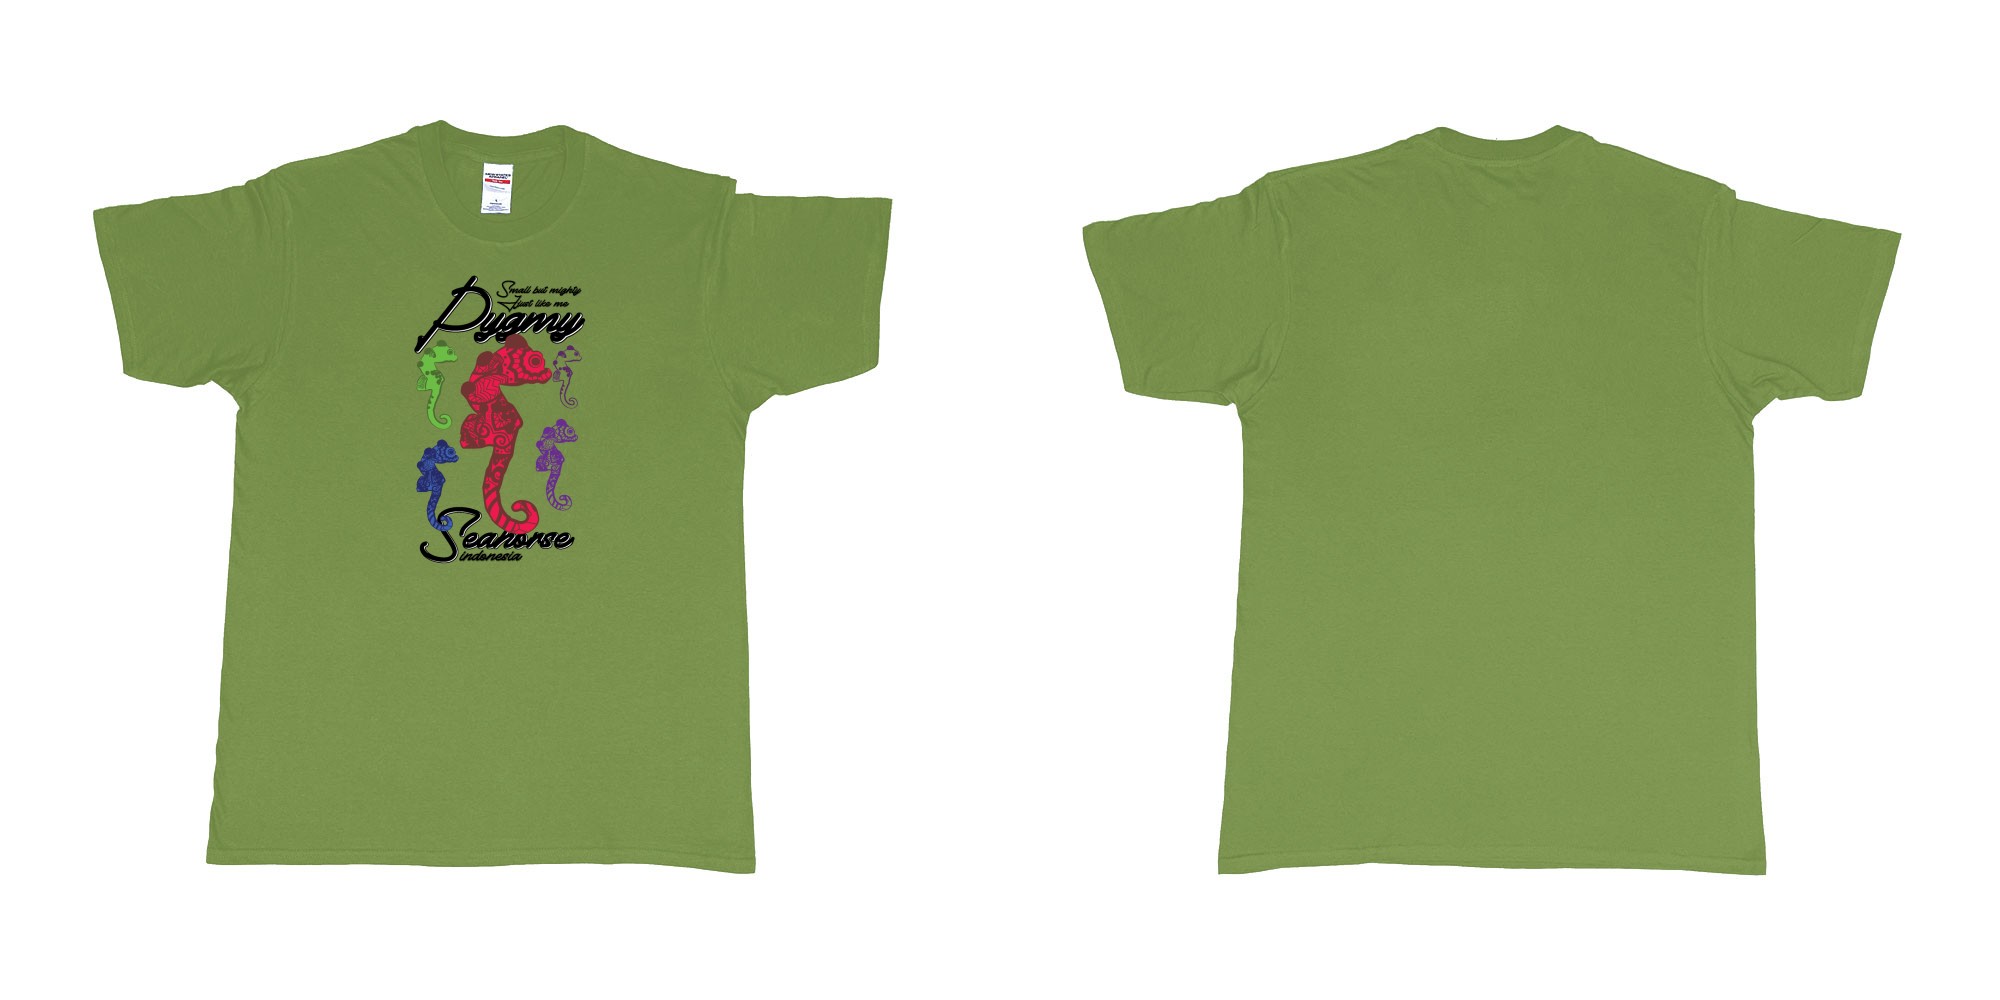 Custom tshirt design pygmy seahorse indonesia small but mighty just like me in fabric color military-green choice your own text made in Bali by The Pirate Way